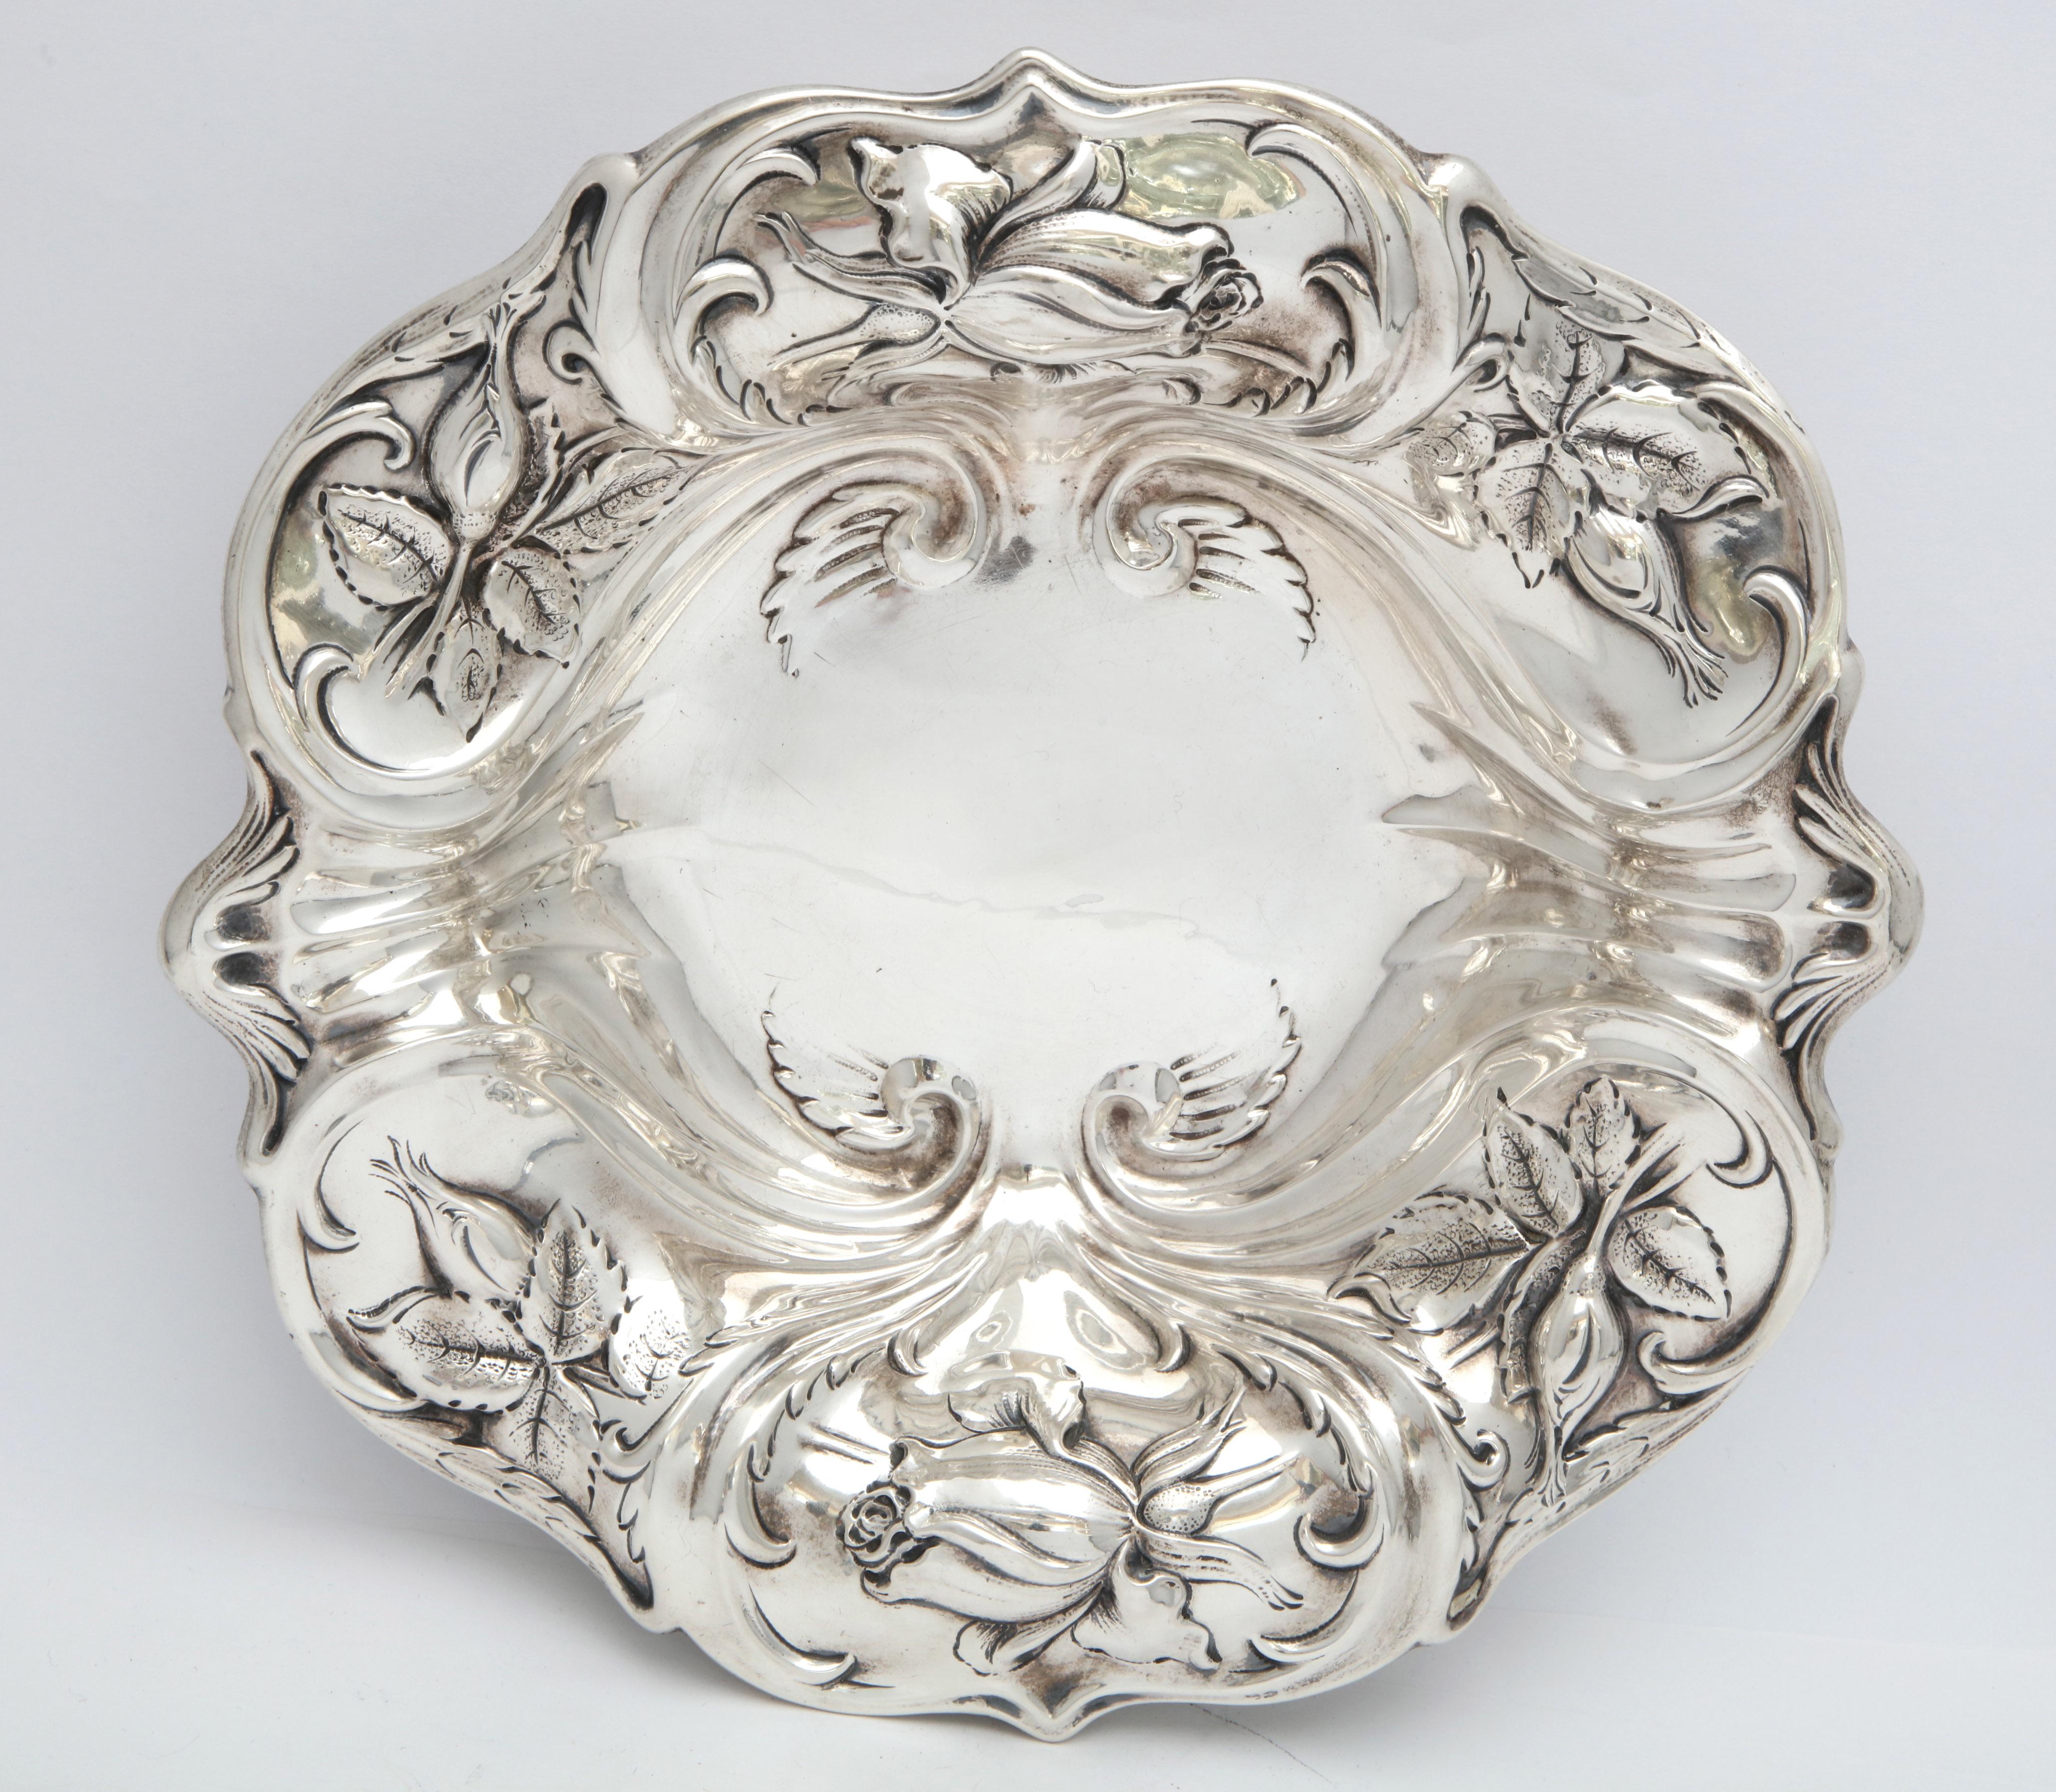 Art Nouveau, sterling silver serving bowl, Whiting Mfg. Co., Providence, Rhode Island, circa 1895. Blown out roses and rose buds decorate the bowl, their stems whipping around the bowl. Measures 9 inches in diameter x 2 inches high. Weighs 6.650